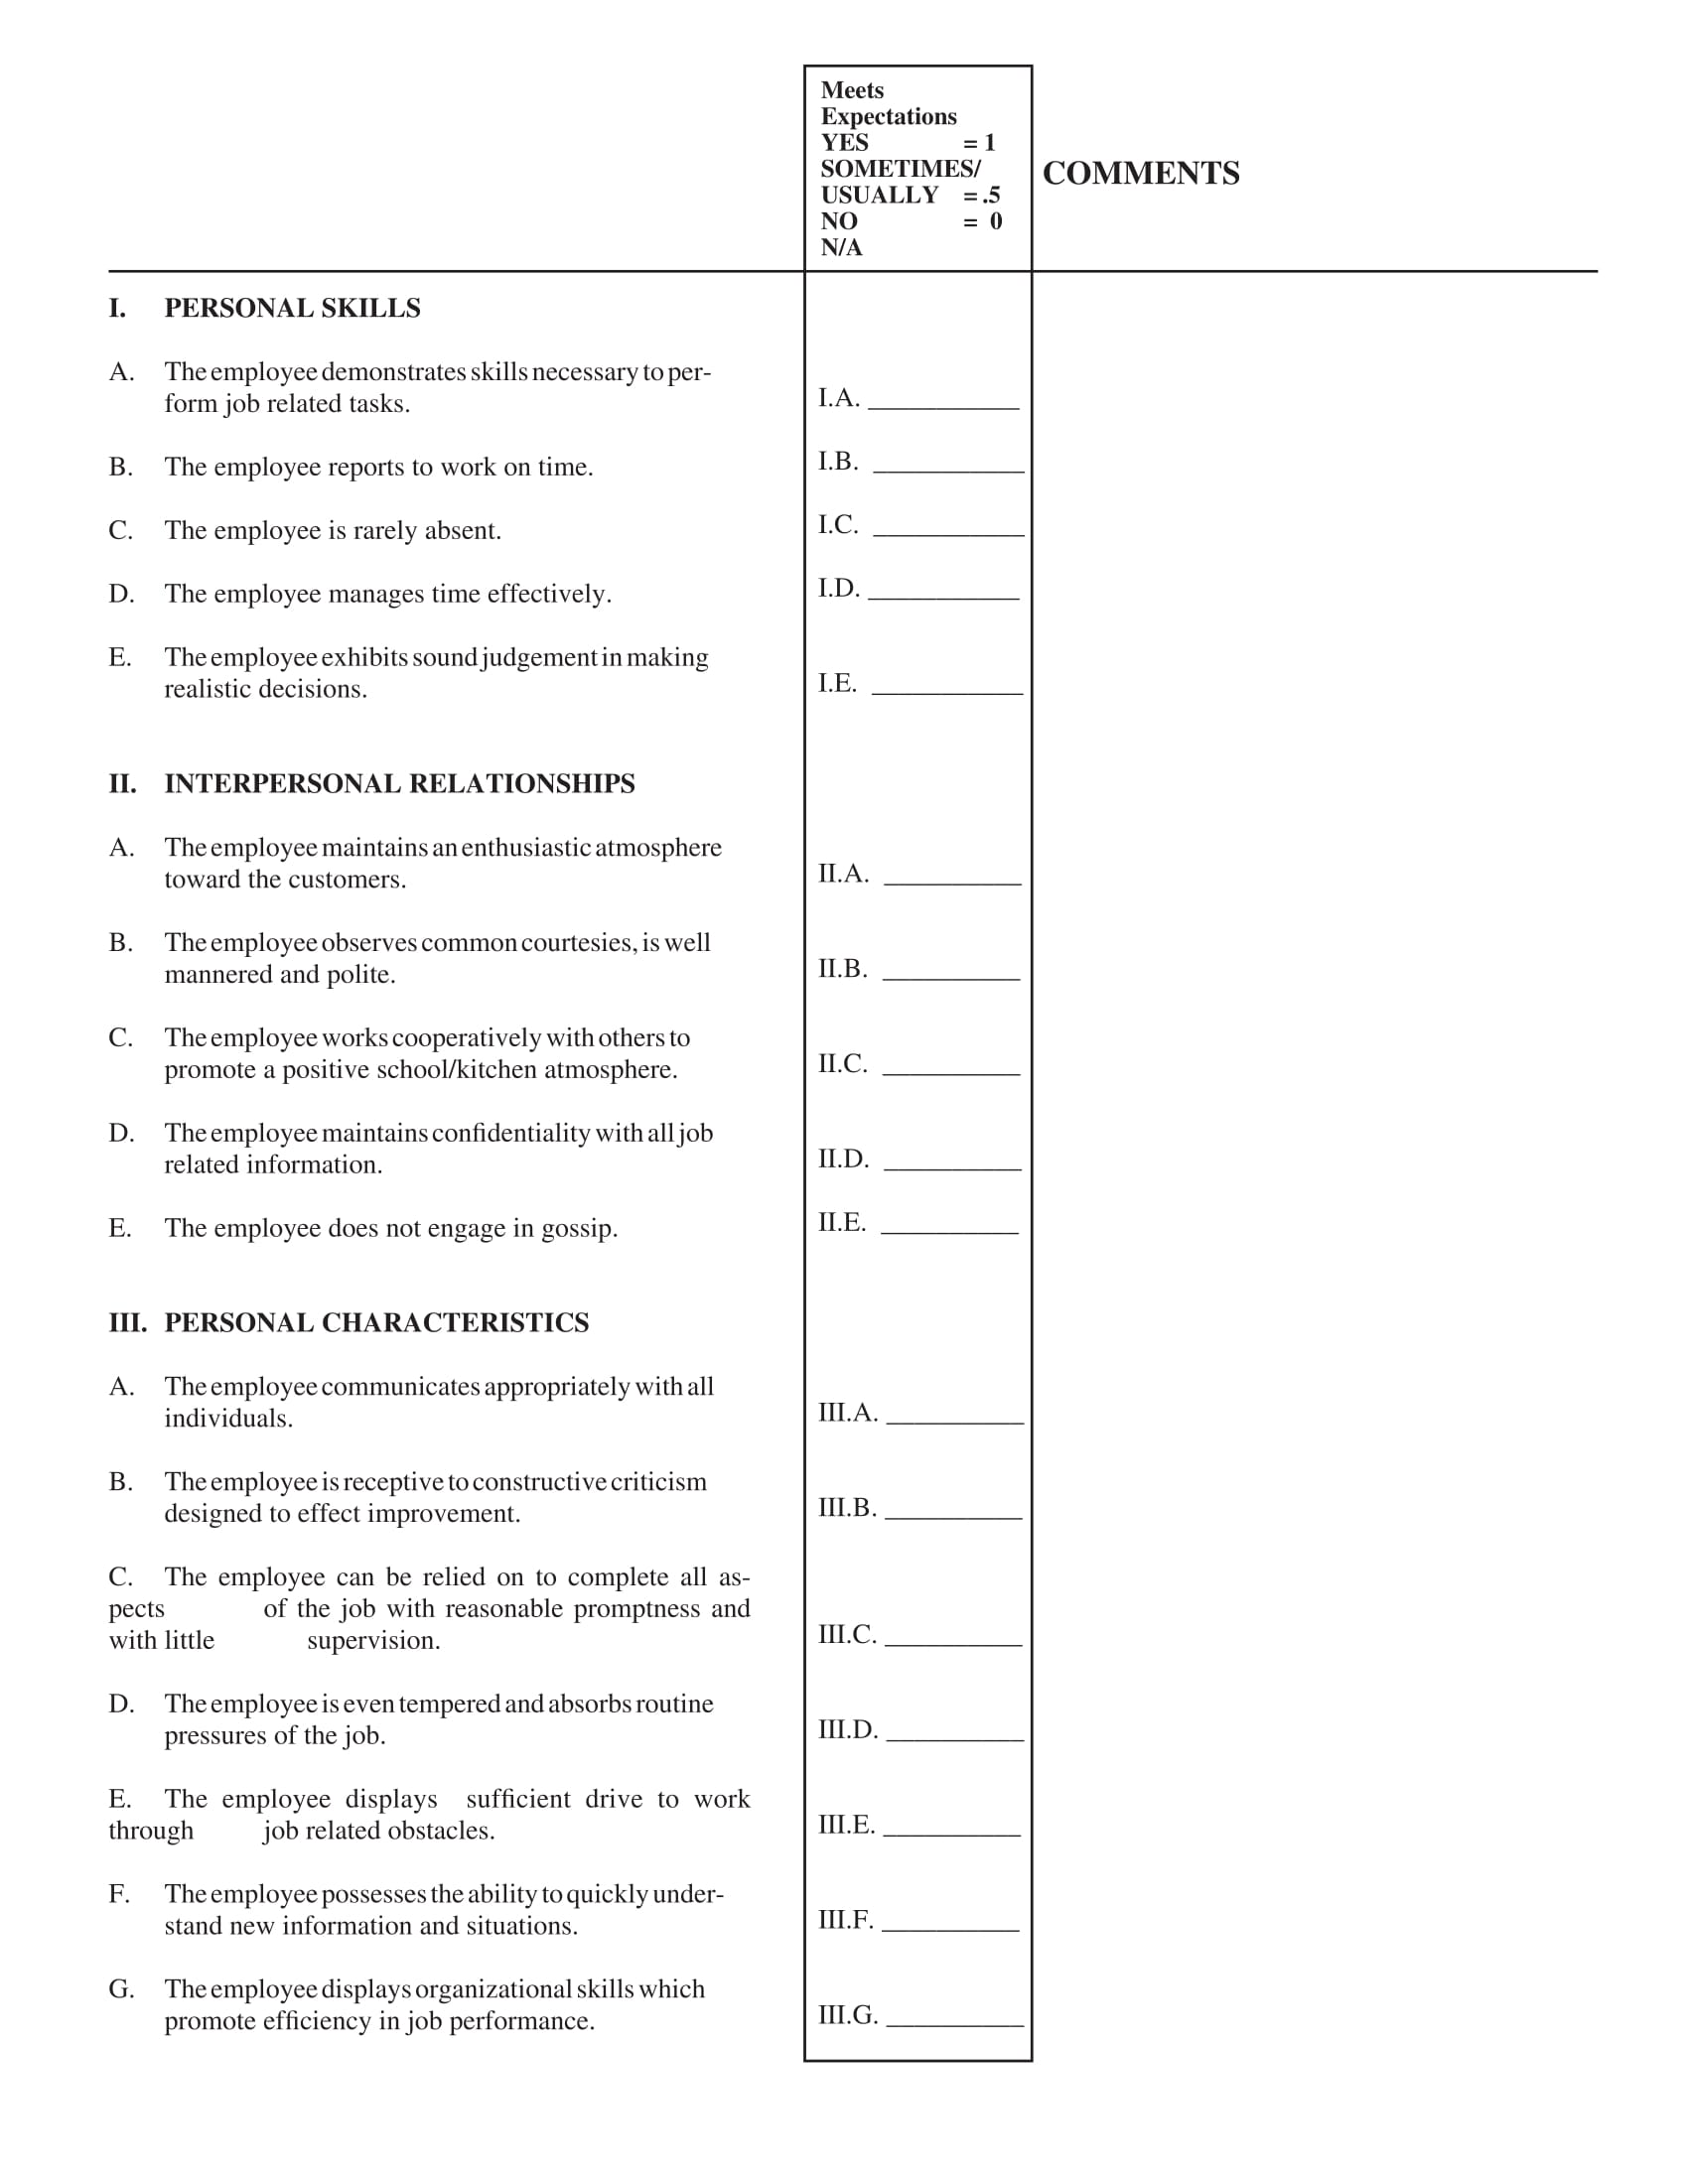 food service employee evaluation form 3